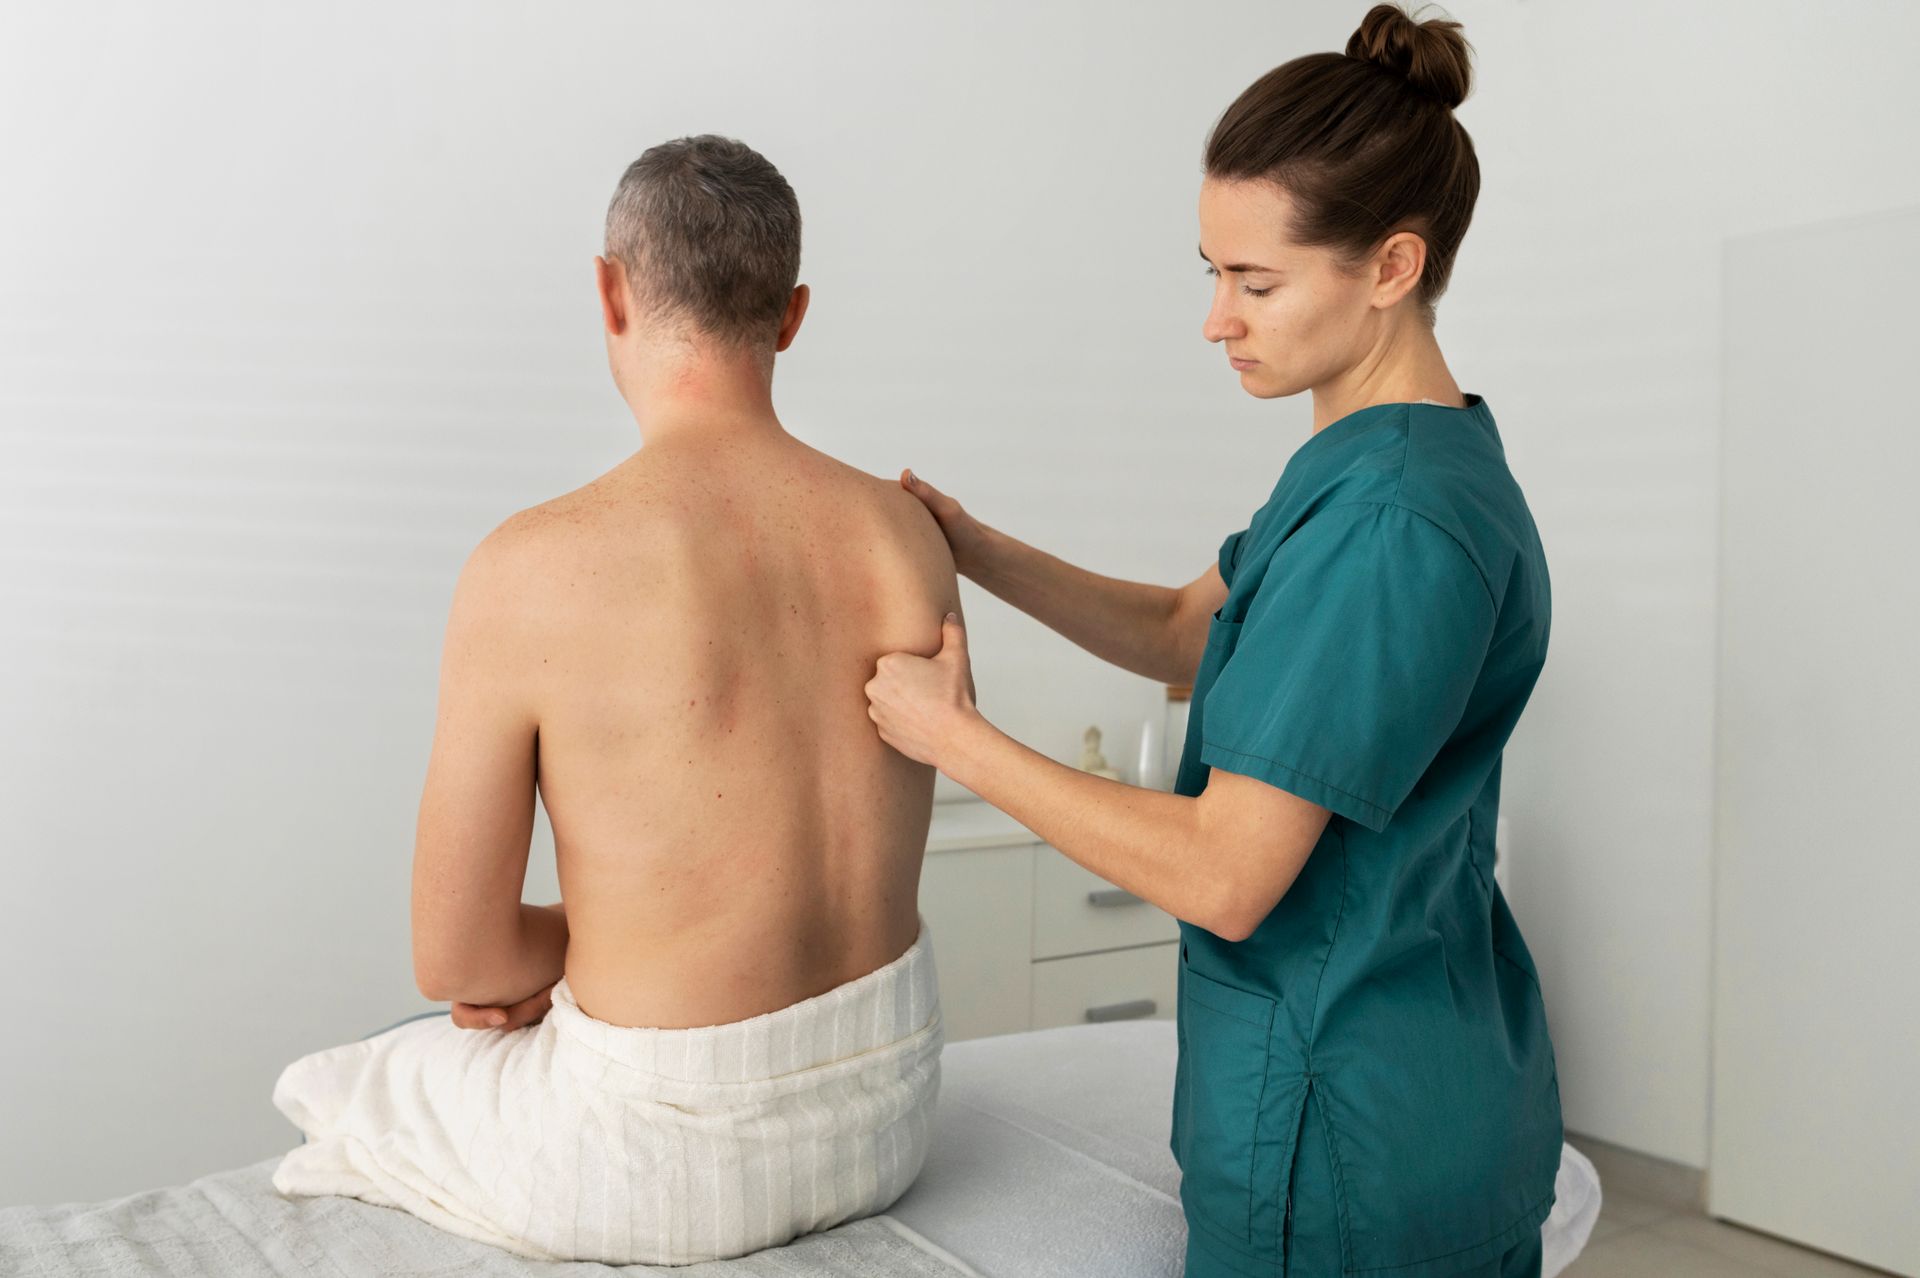 a woman is giving a man a massage on his back .